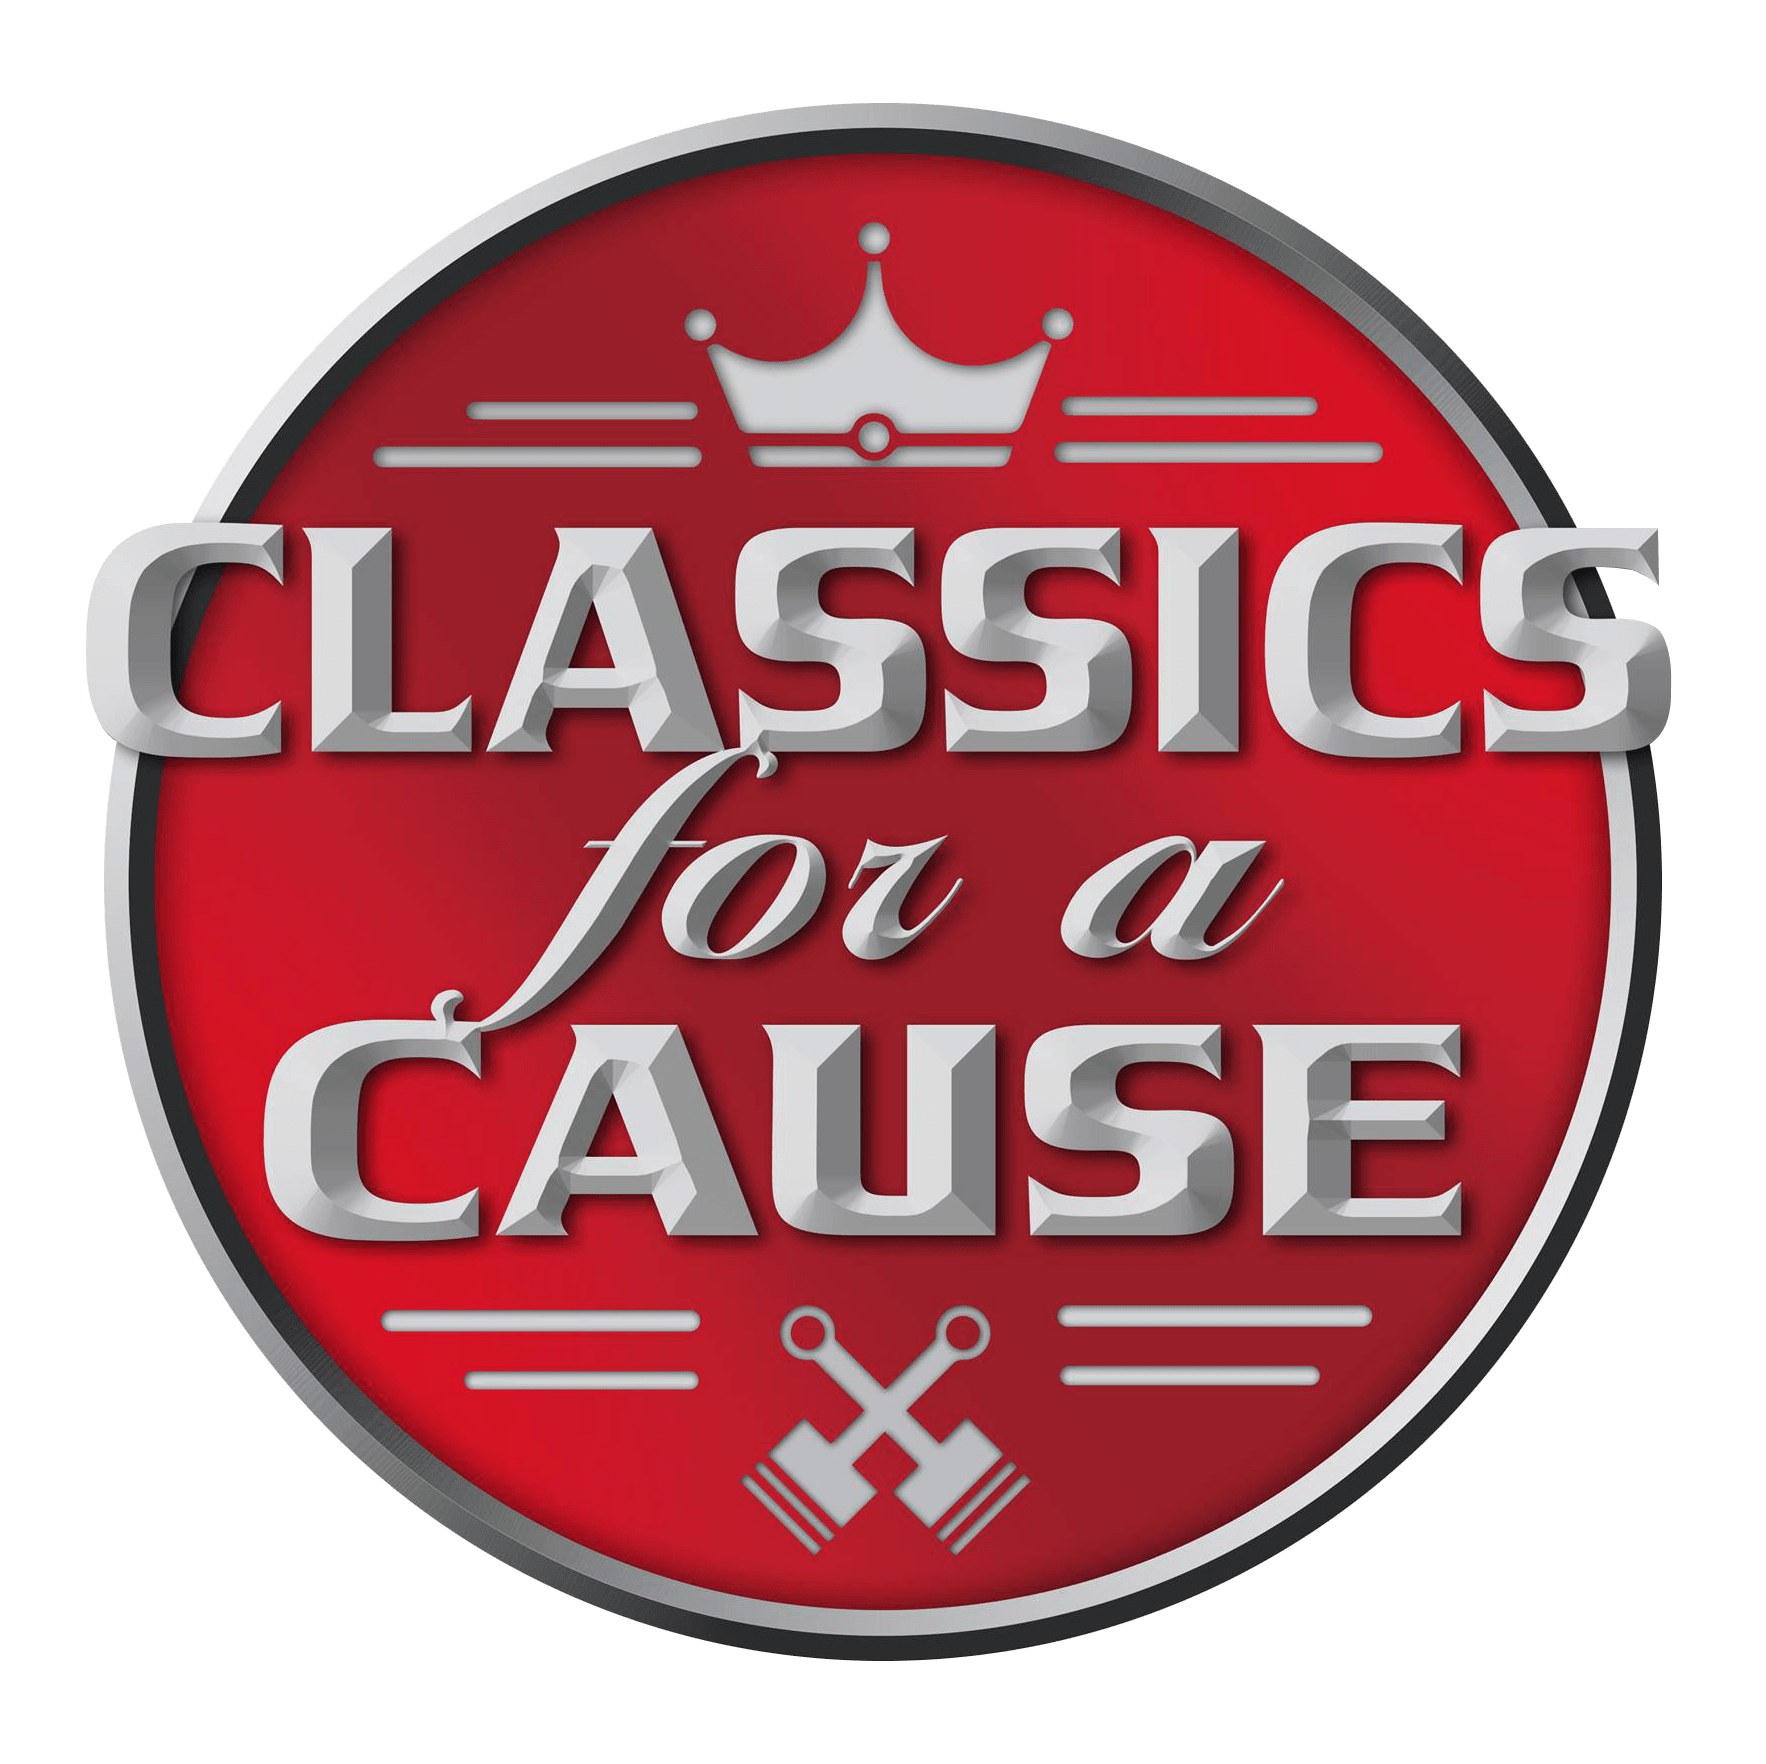 Classics for a Cause - CURRENTLY UNDER CONSTRUCTION